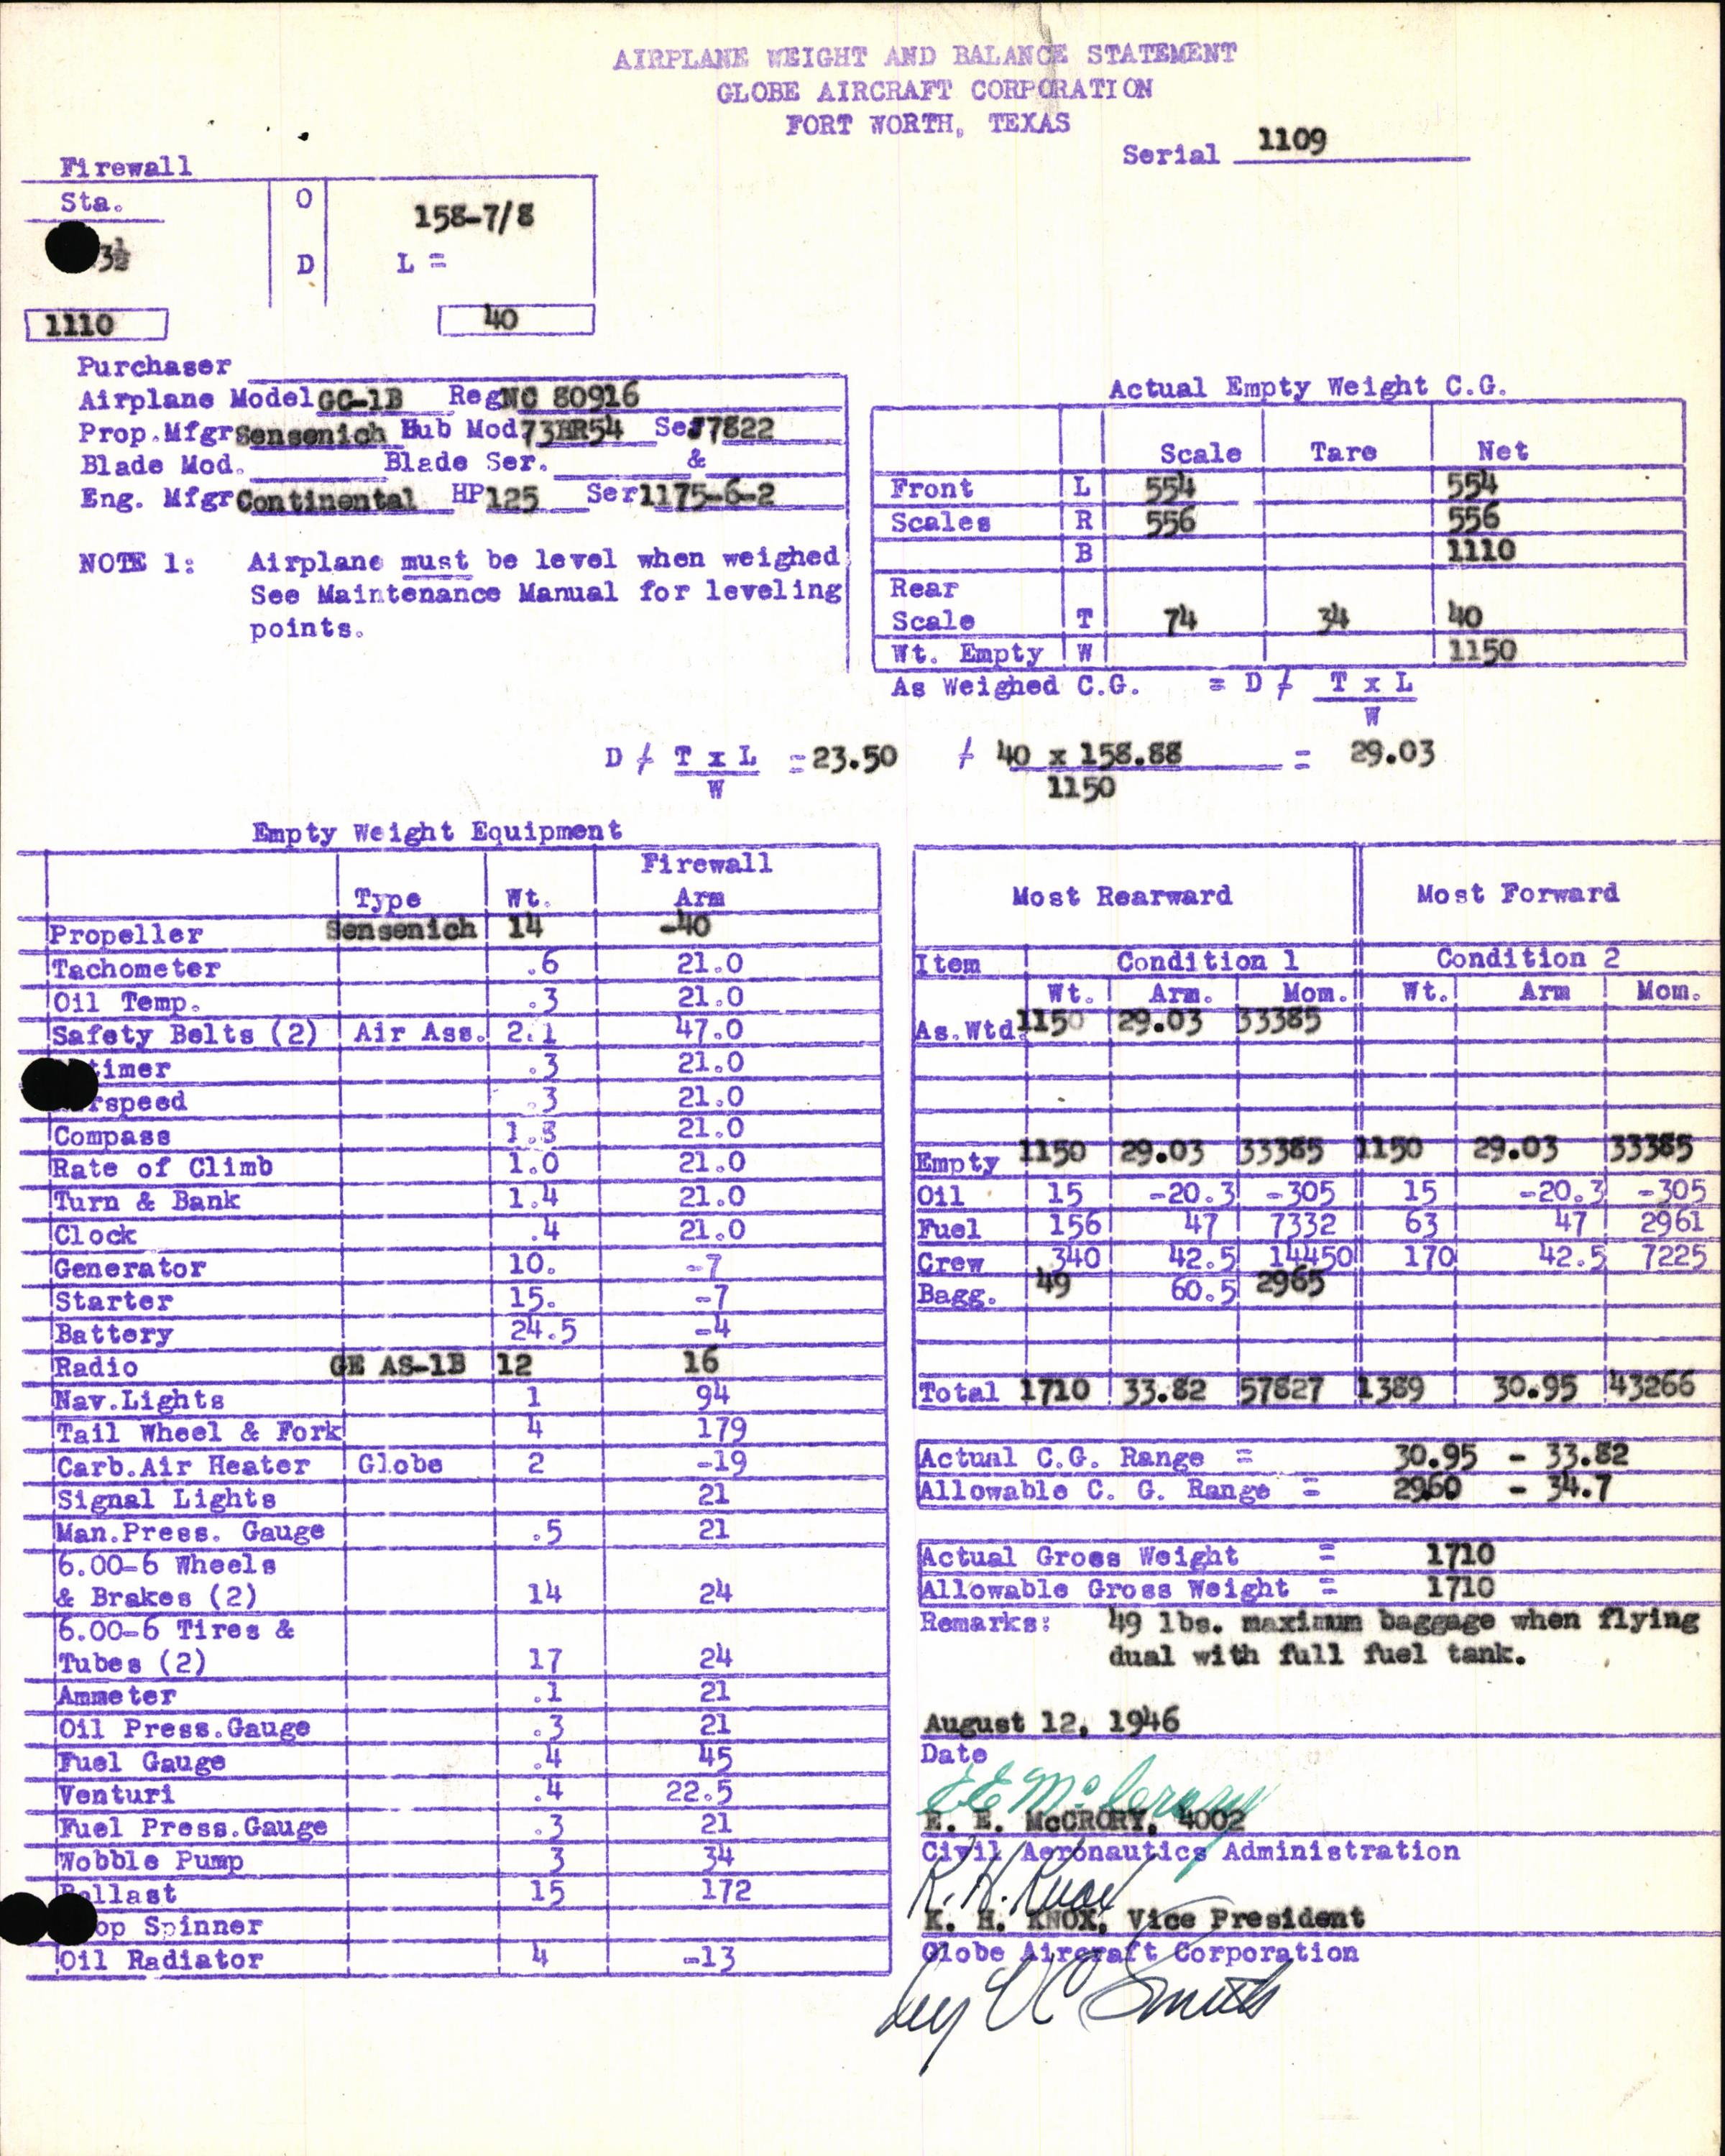 Sample page 7 from AirCorps Library document: Technical Information for Serial Number 1109